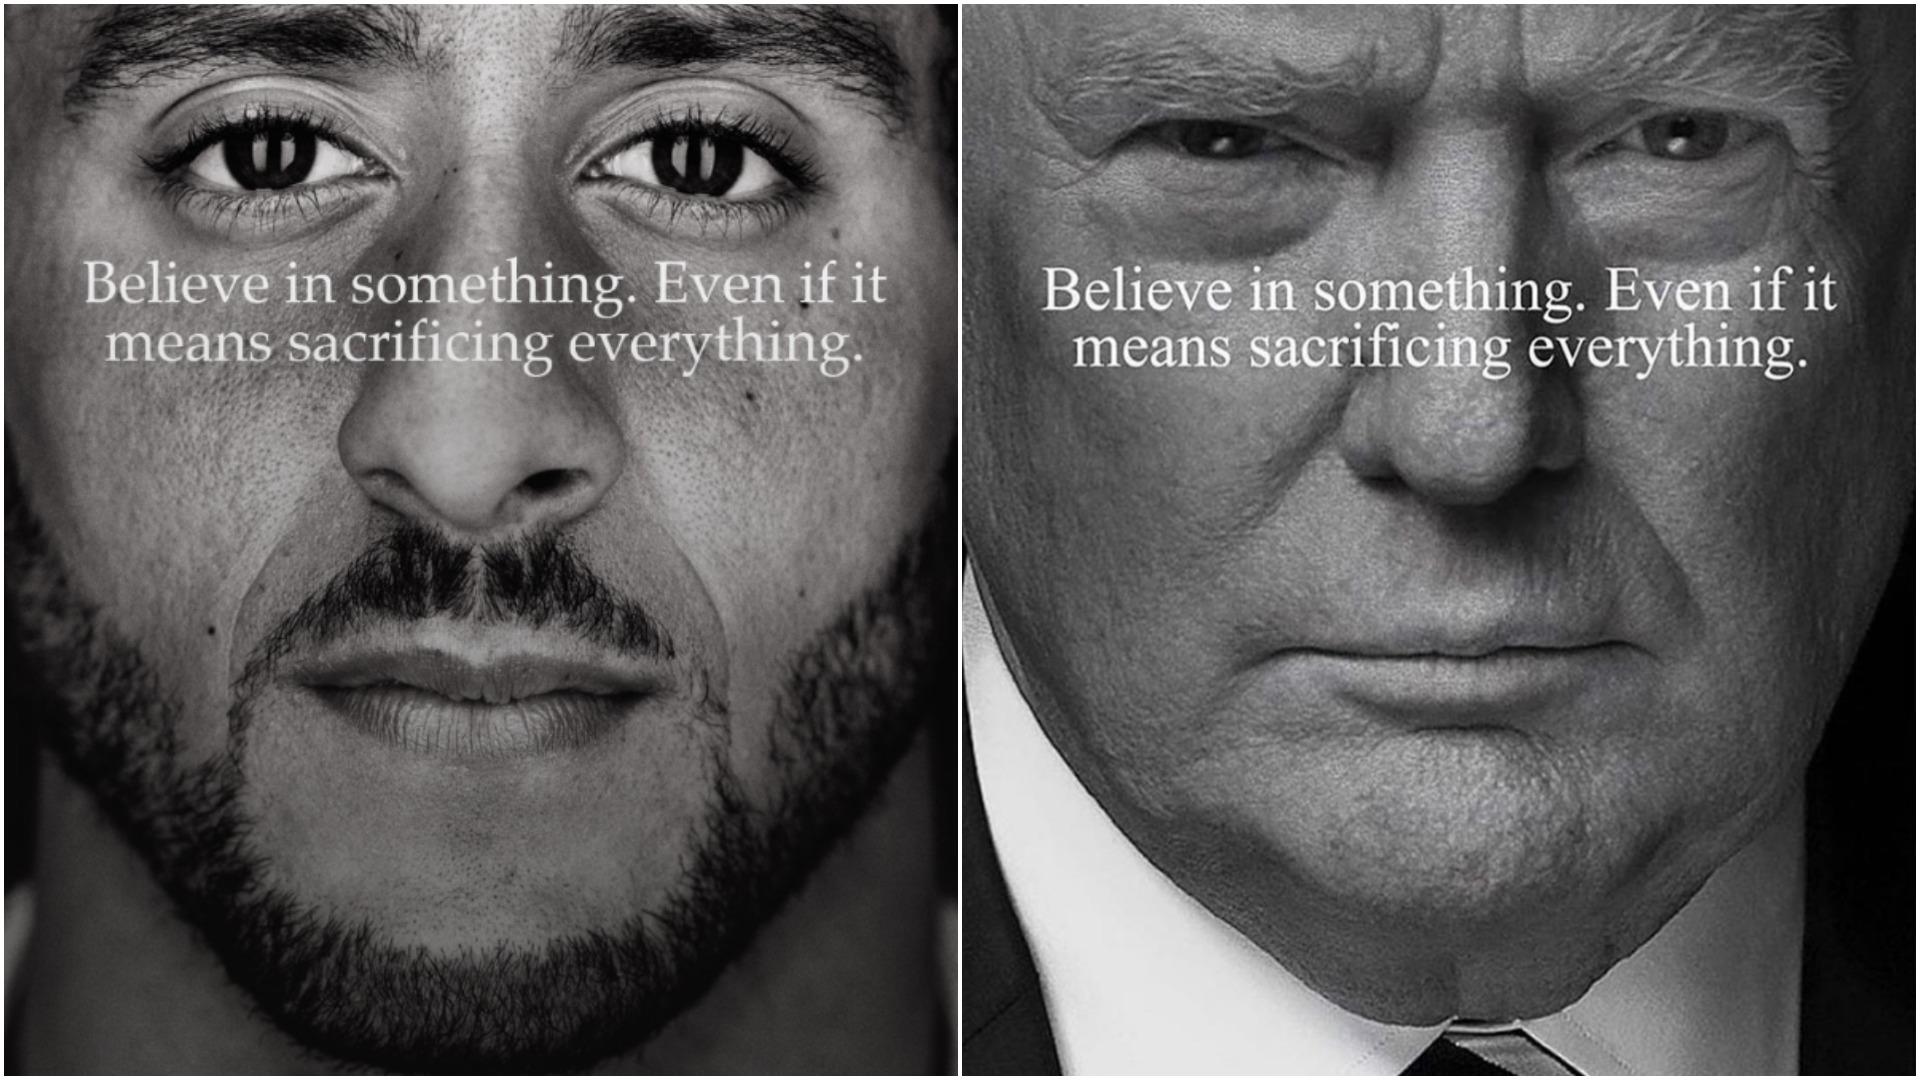 nike controversial commercial